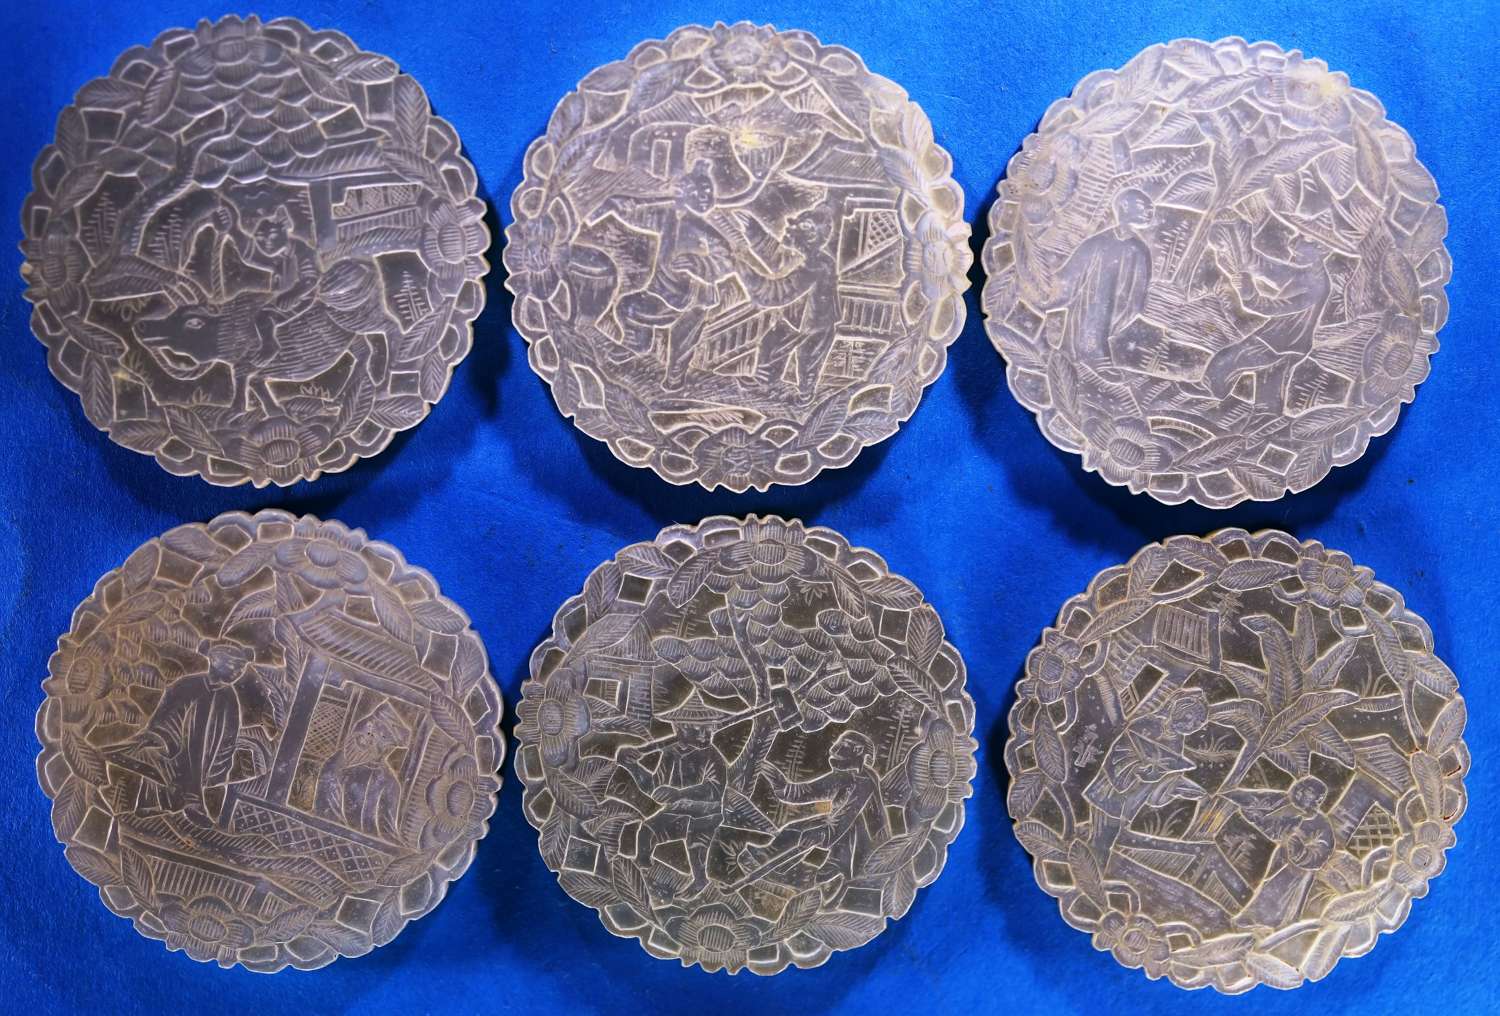 Six top quality deep-carved rounds